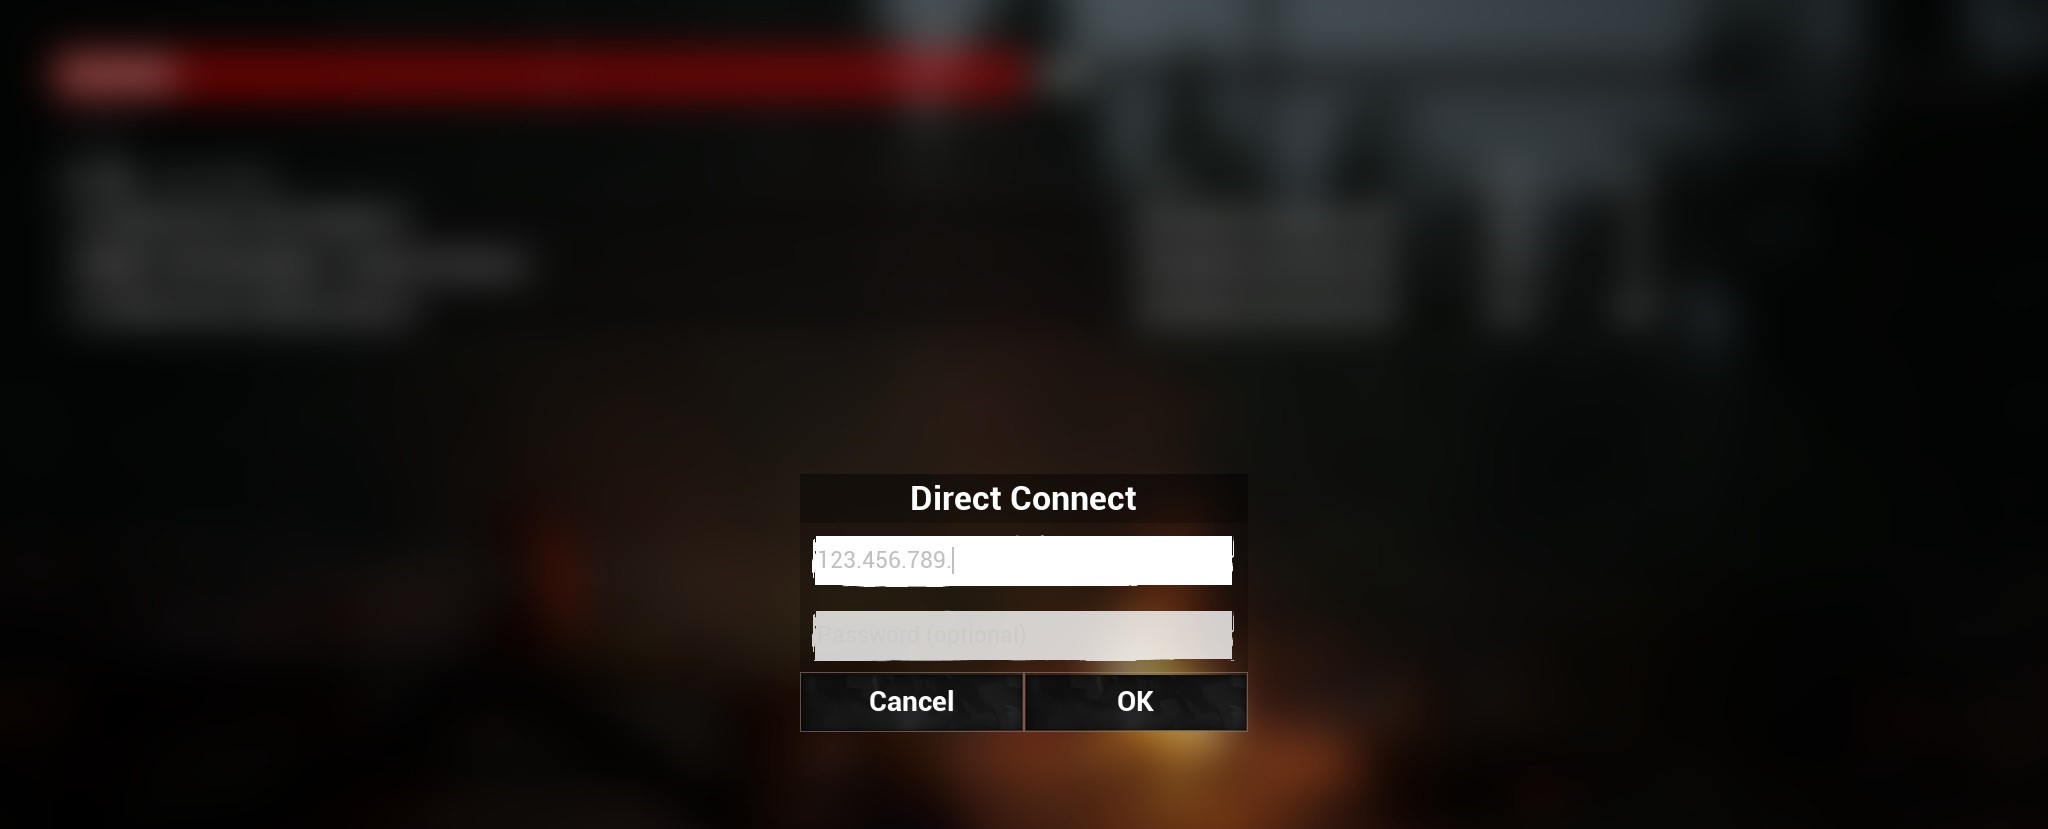 Direct connection page for Dead Matter server